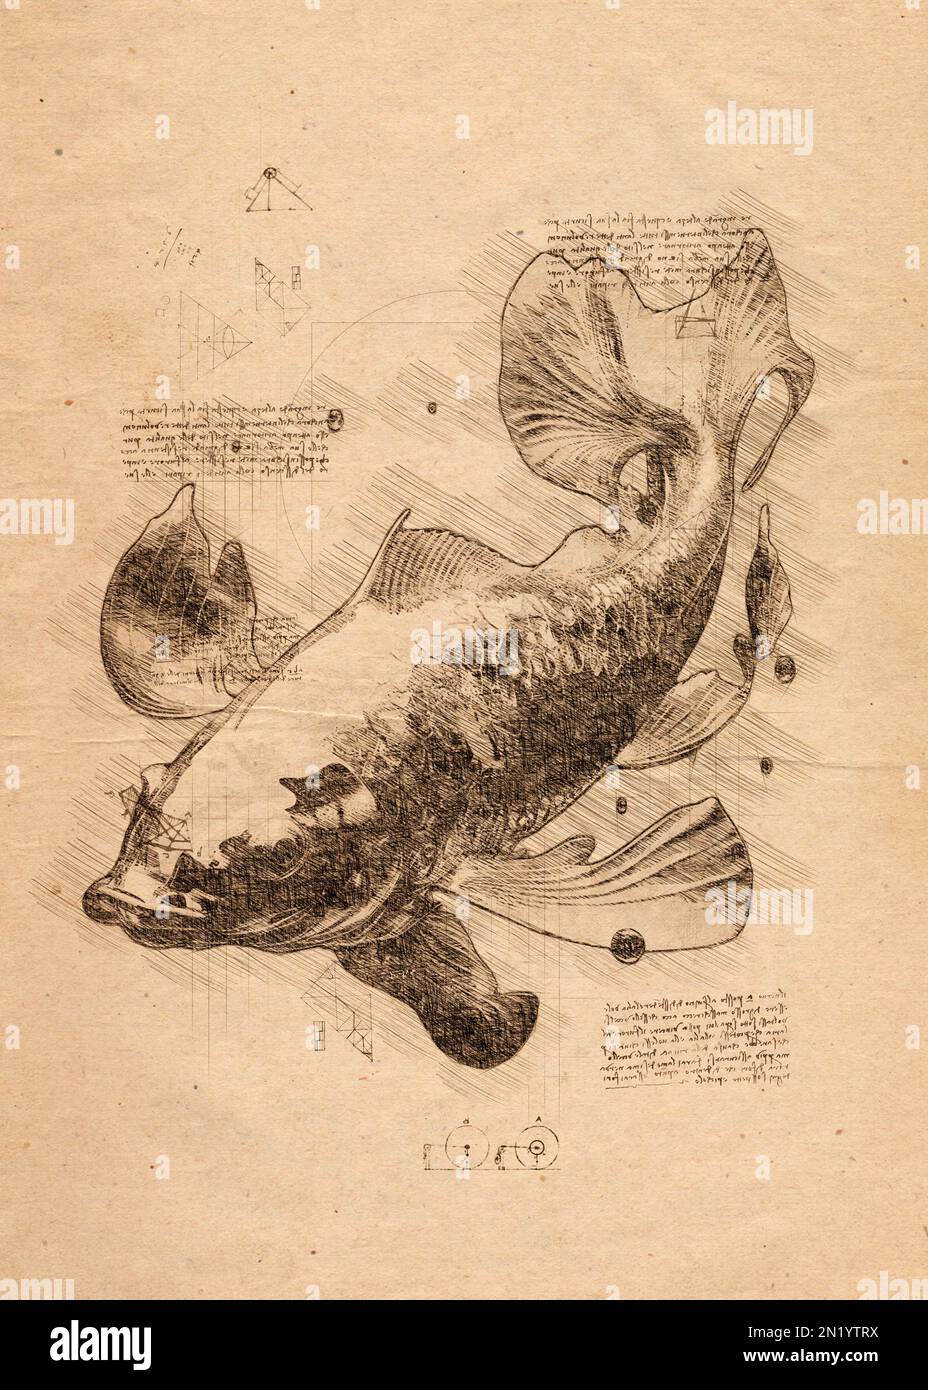 Digital illustration or drawing of a fish in pencil sketch style Stock Photo